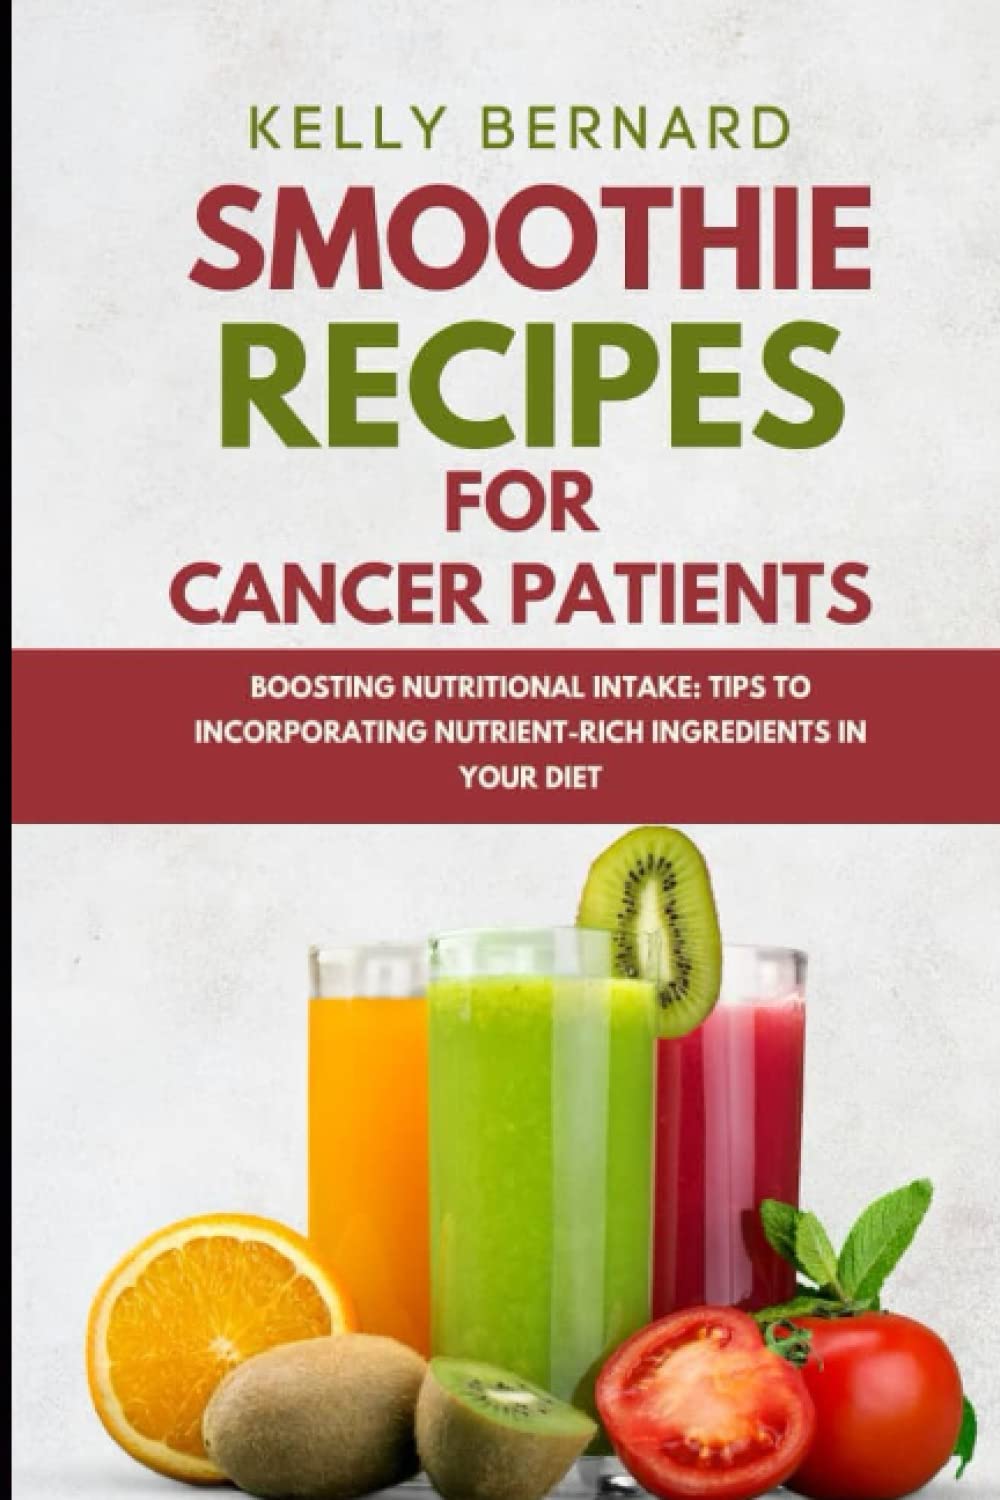 SMOOTHIE RECIPES FOR CANCER PATIENTS: BOOSTING NUTRITIONAL INTAKE: TIPS TO INCORPORATING NUTRIENT-RICH INGREDIENTS IN YOUR DIET